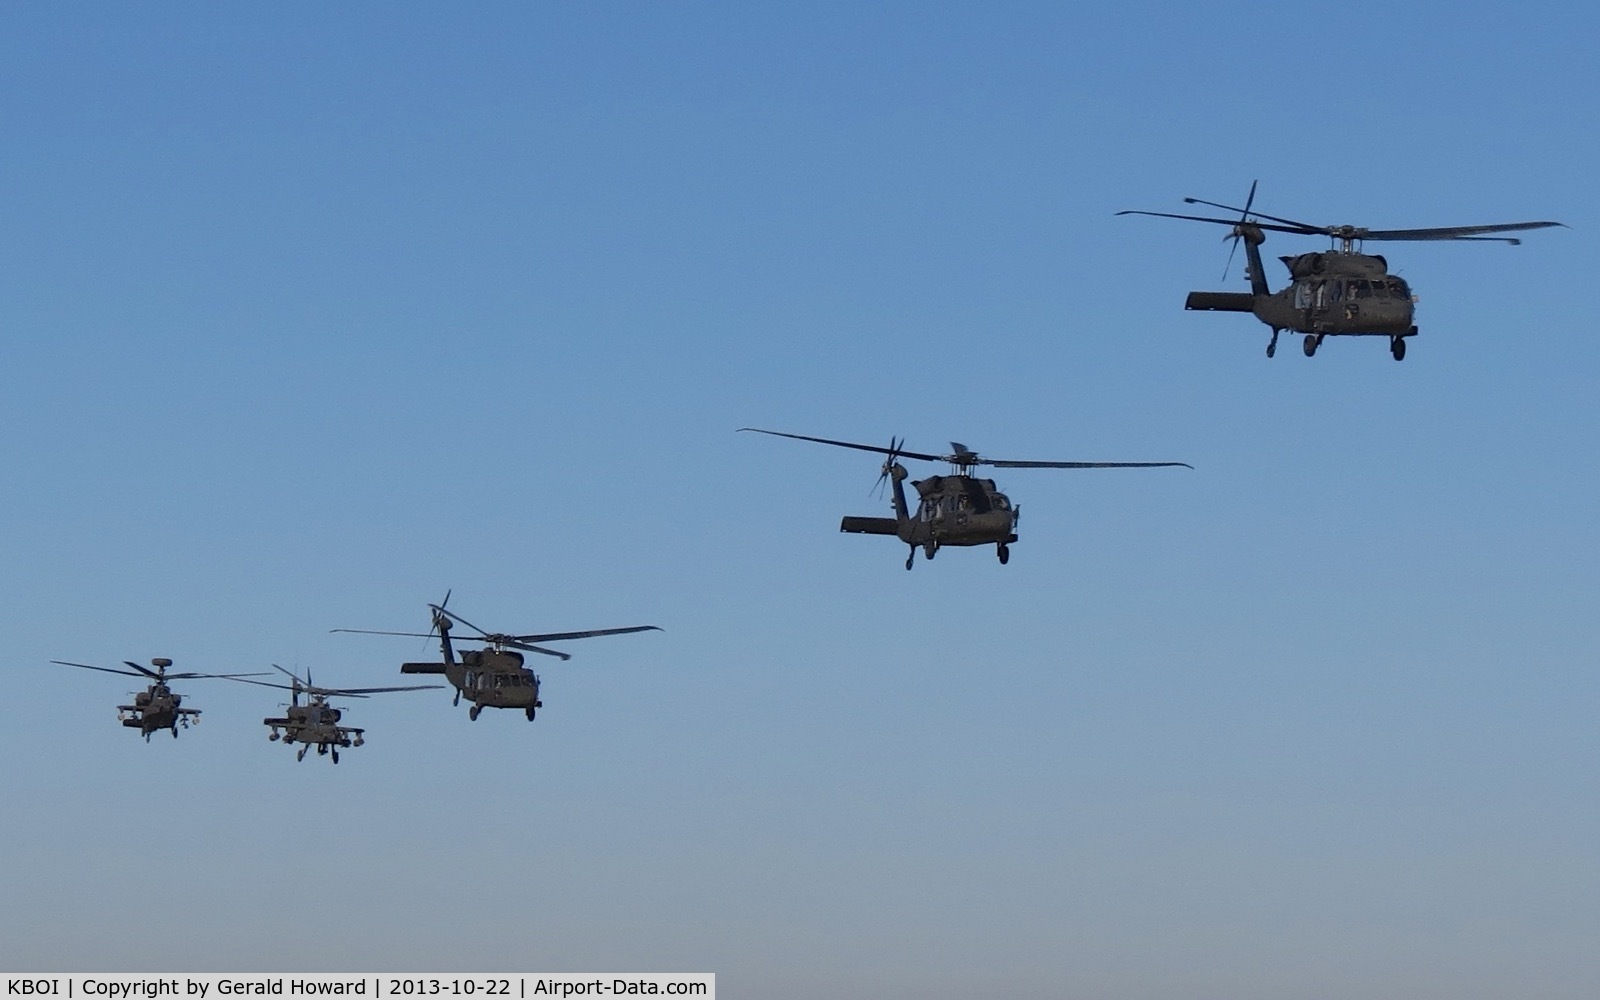 Boise Air Terminal/gowen Fld Airport (BOI) - UH-60s & AH-64s from the 1-183rd AVN BN, Idaho Army National Guard flying out for training.